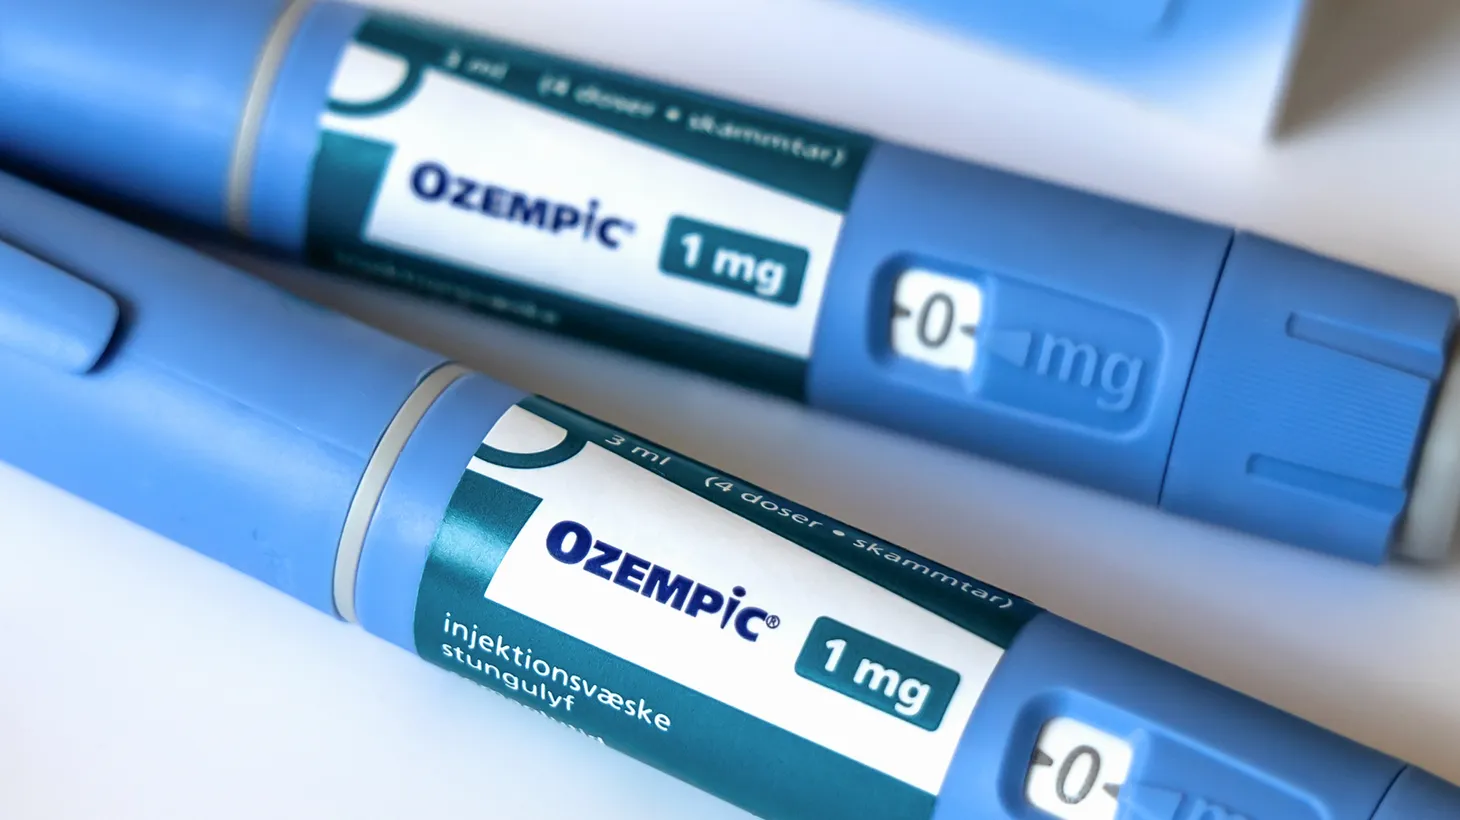 Originally intended for people with diabetes, the use of Ozempic as a weight loss tool has exploded in popularity.